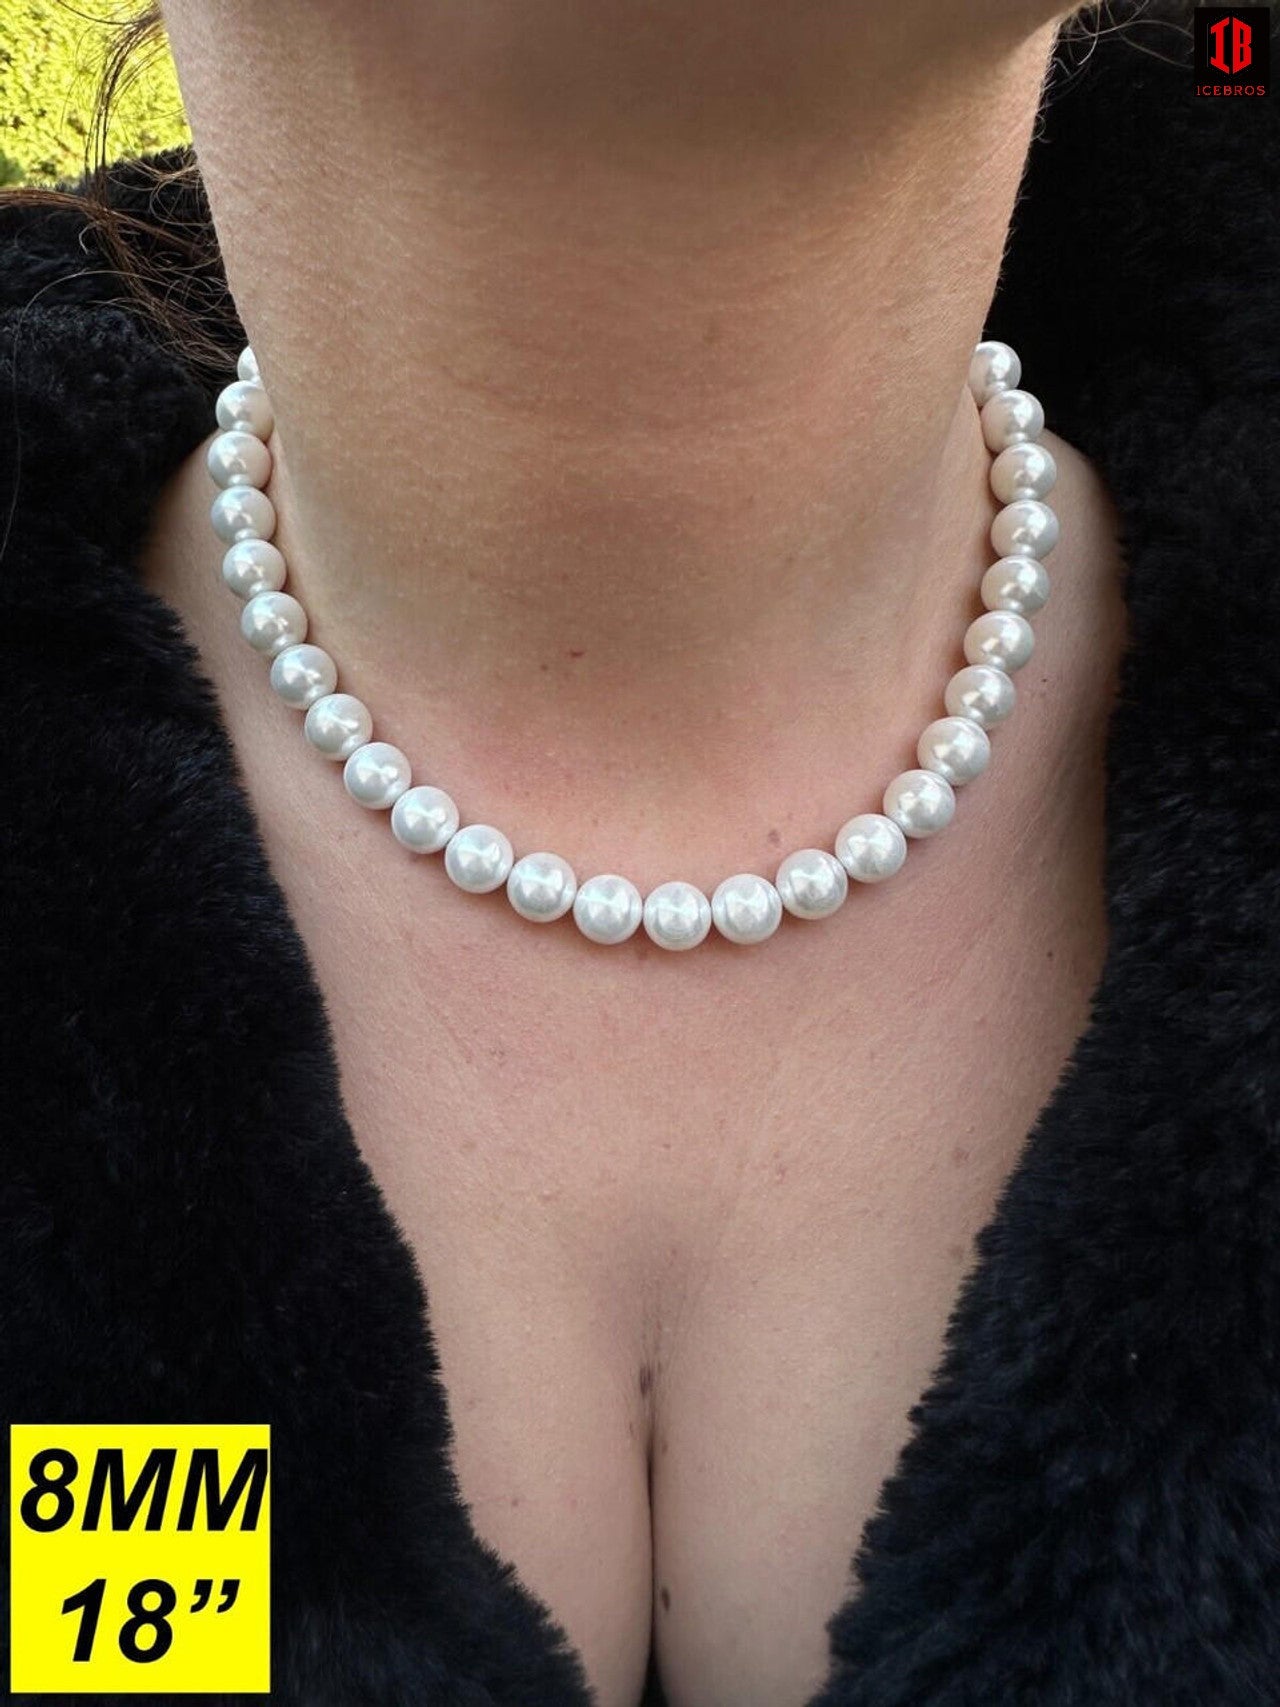 A Detailed View of Women Wearing White Cultured Pearl Necklace 